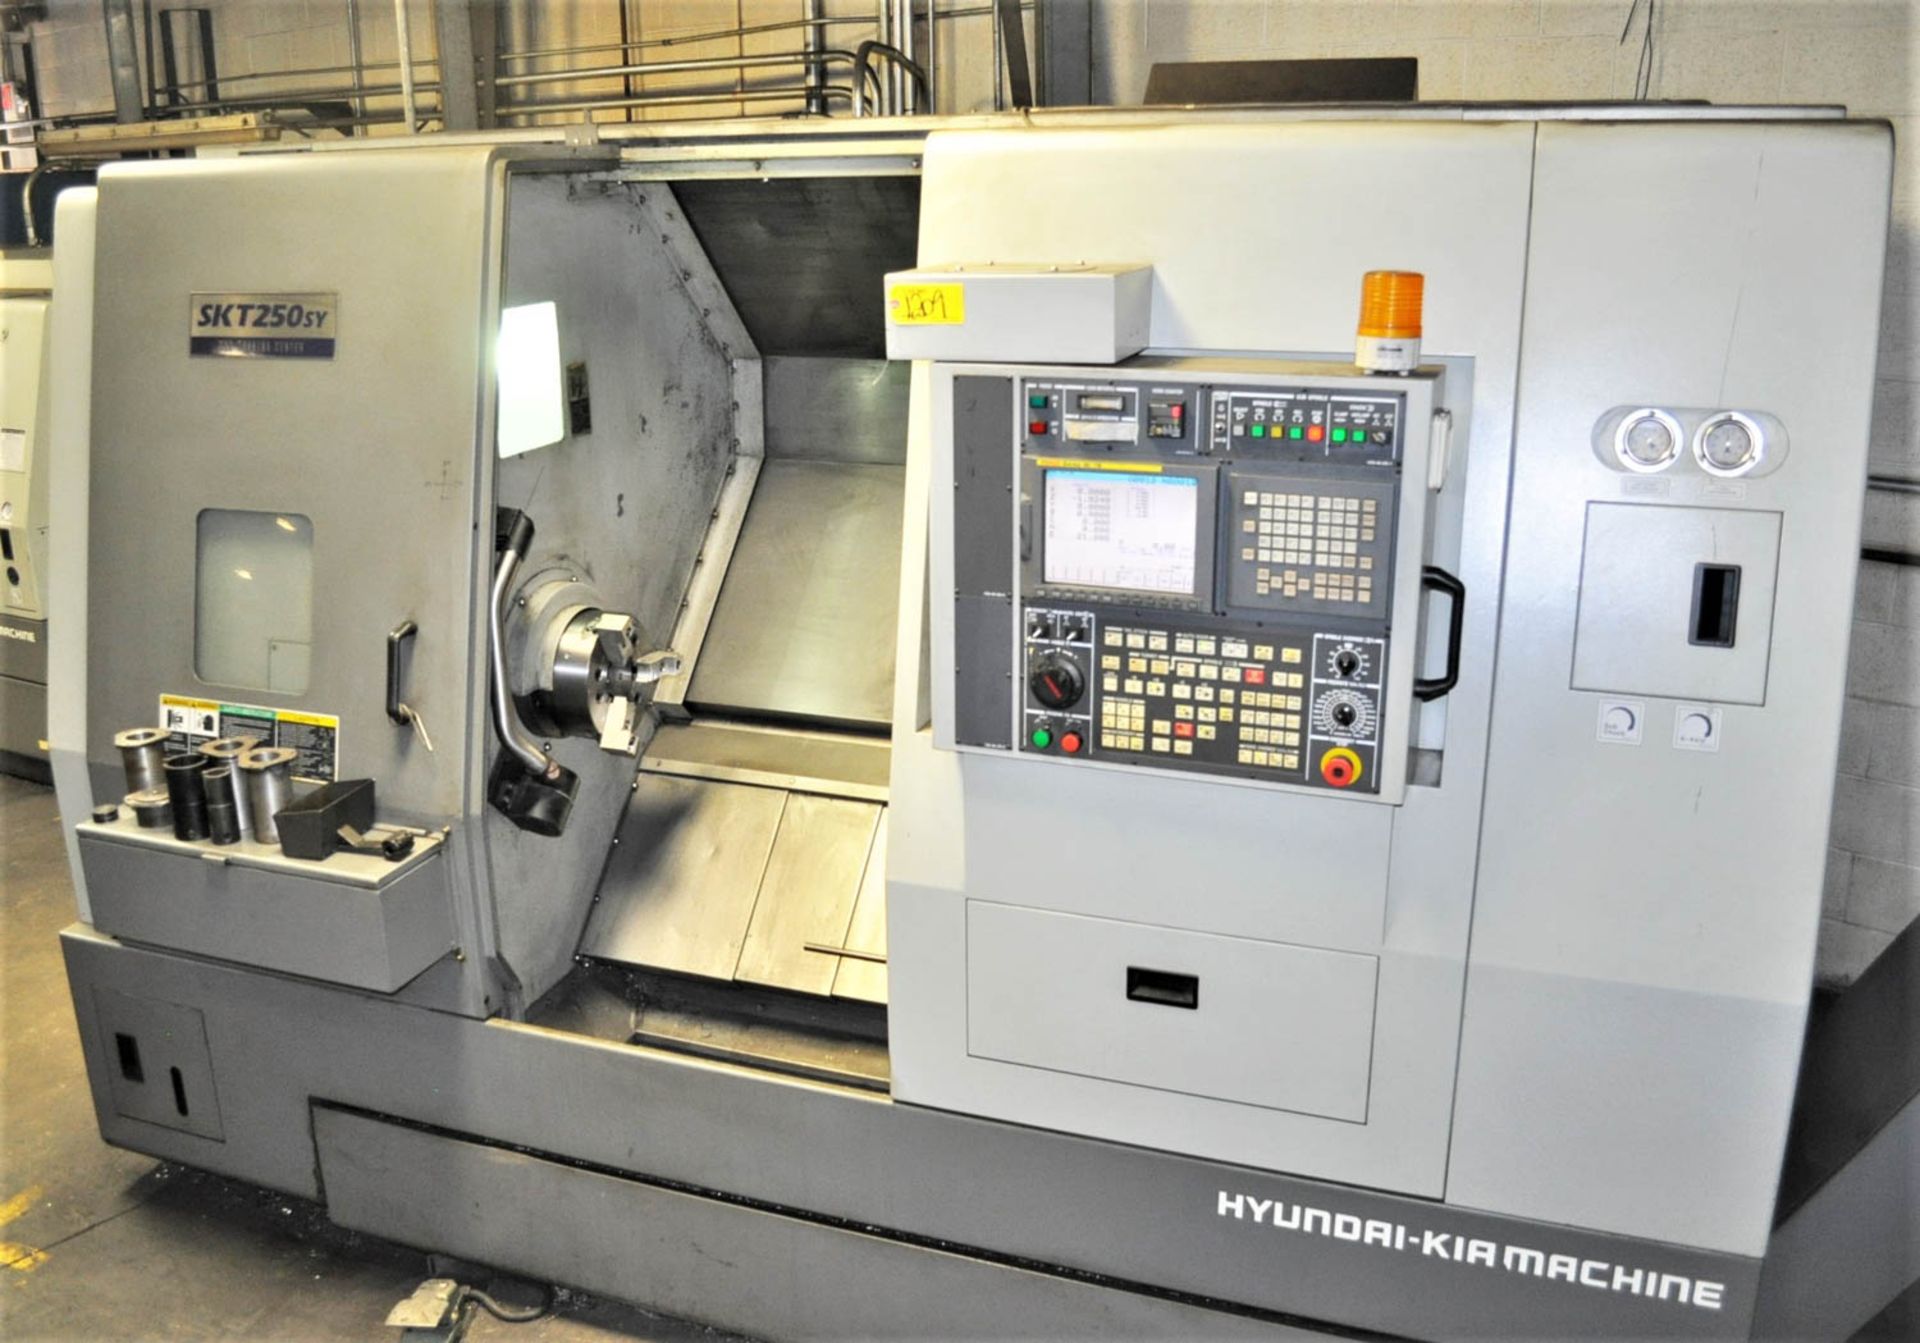 HYUNDAI KIA MDL. SKT250SY CNC TURNING CENTER, WITH SUB-SPINDLE, C/Y AXIS, LIVE MILLING, FANUC - Image 2 of 7